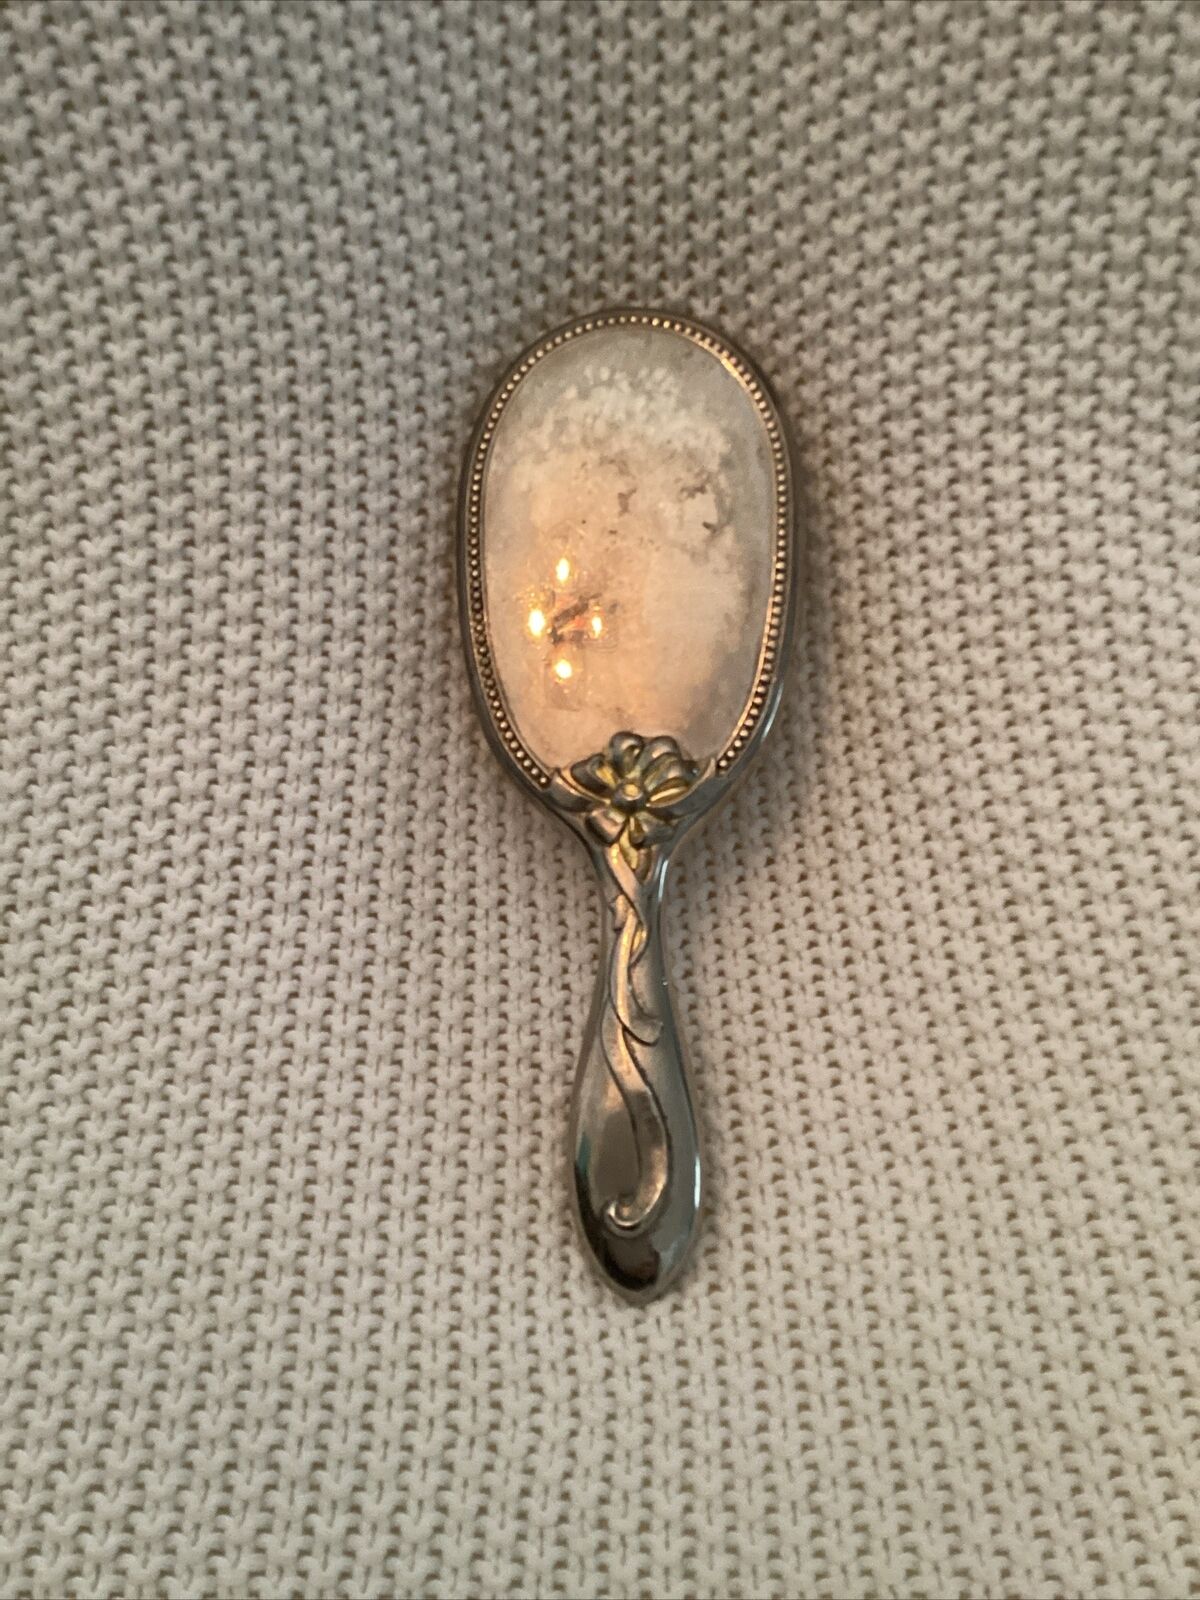 Vintage Antique Silver Plated Hairbrush BEAUTIFUL~